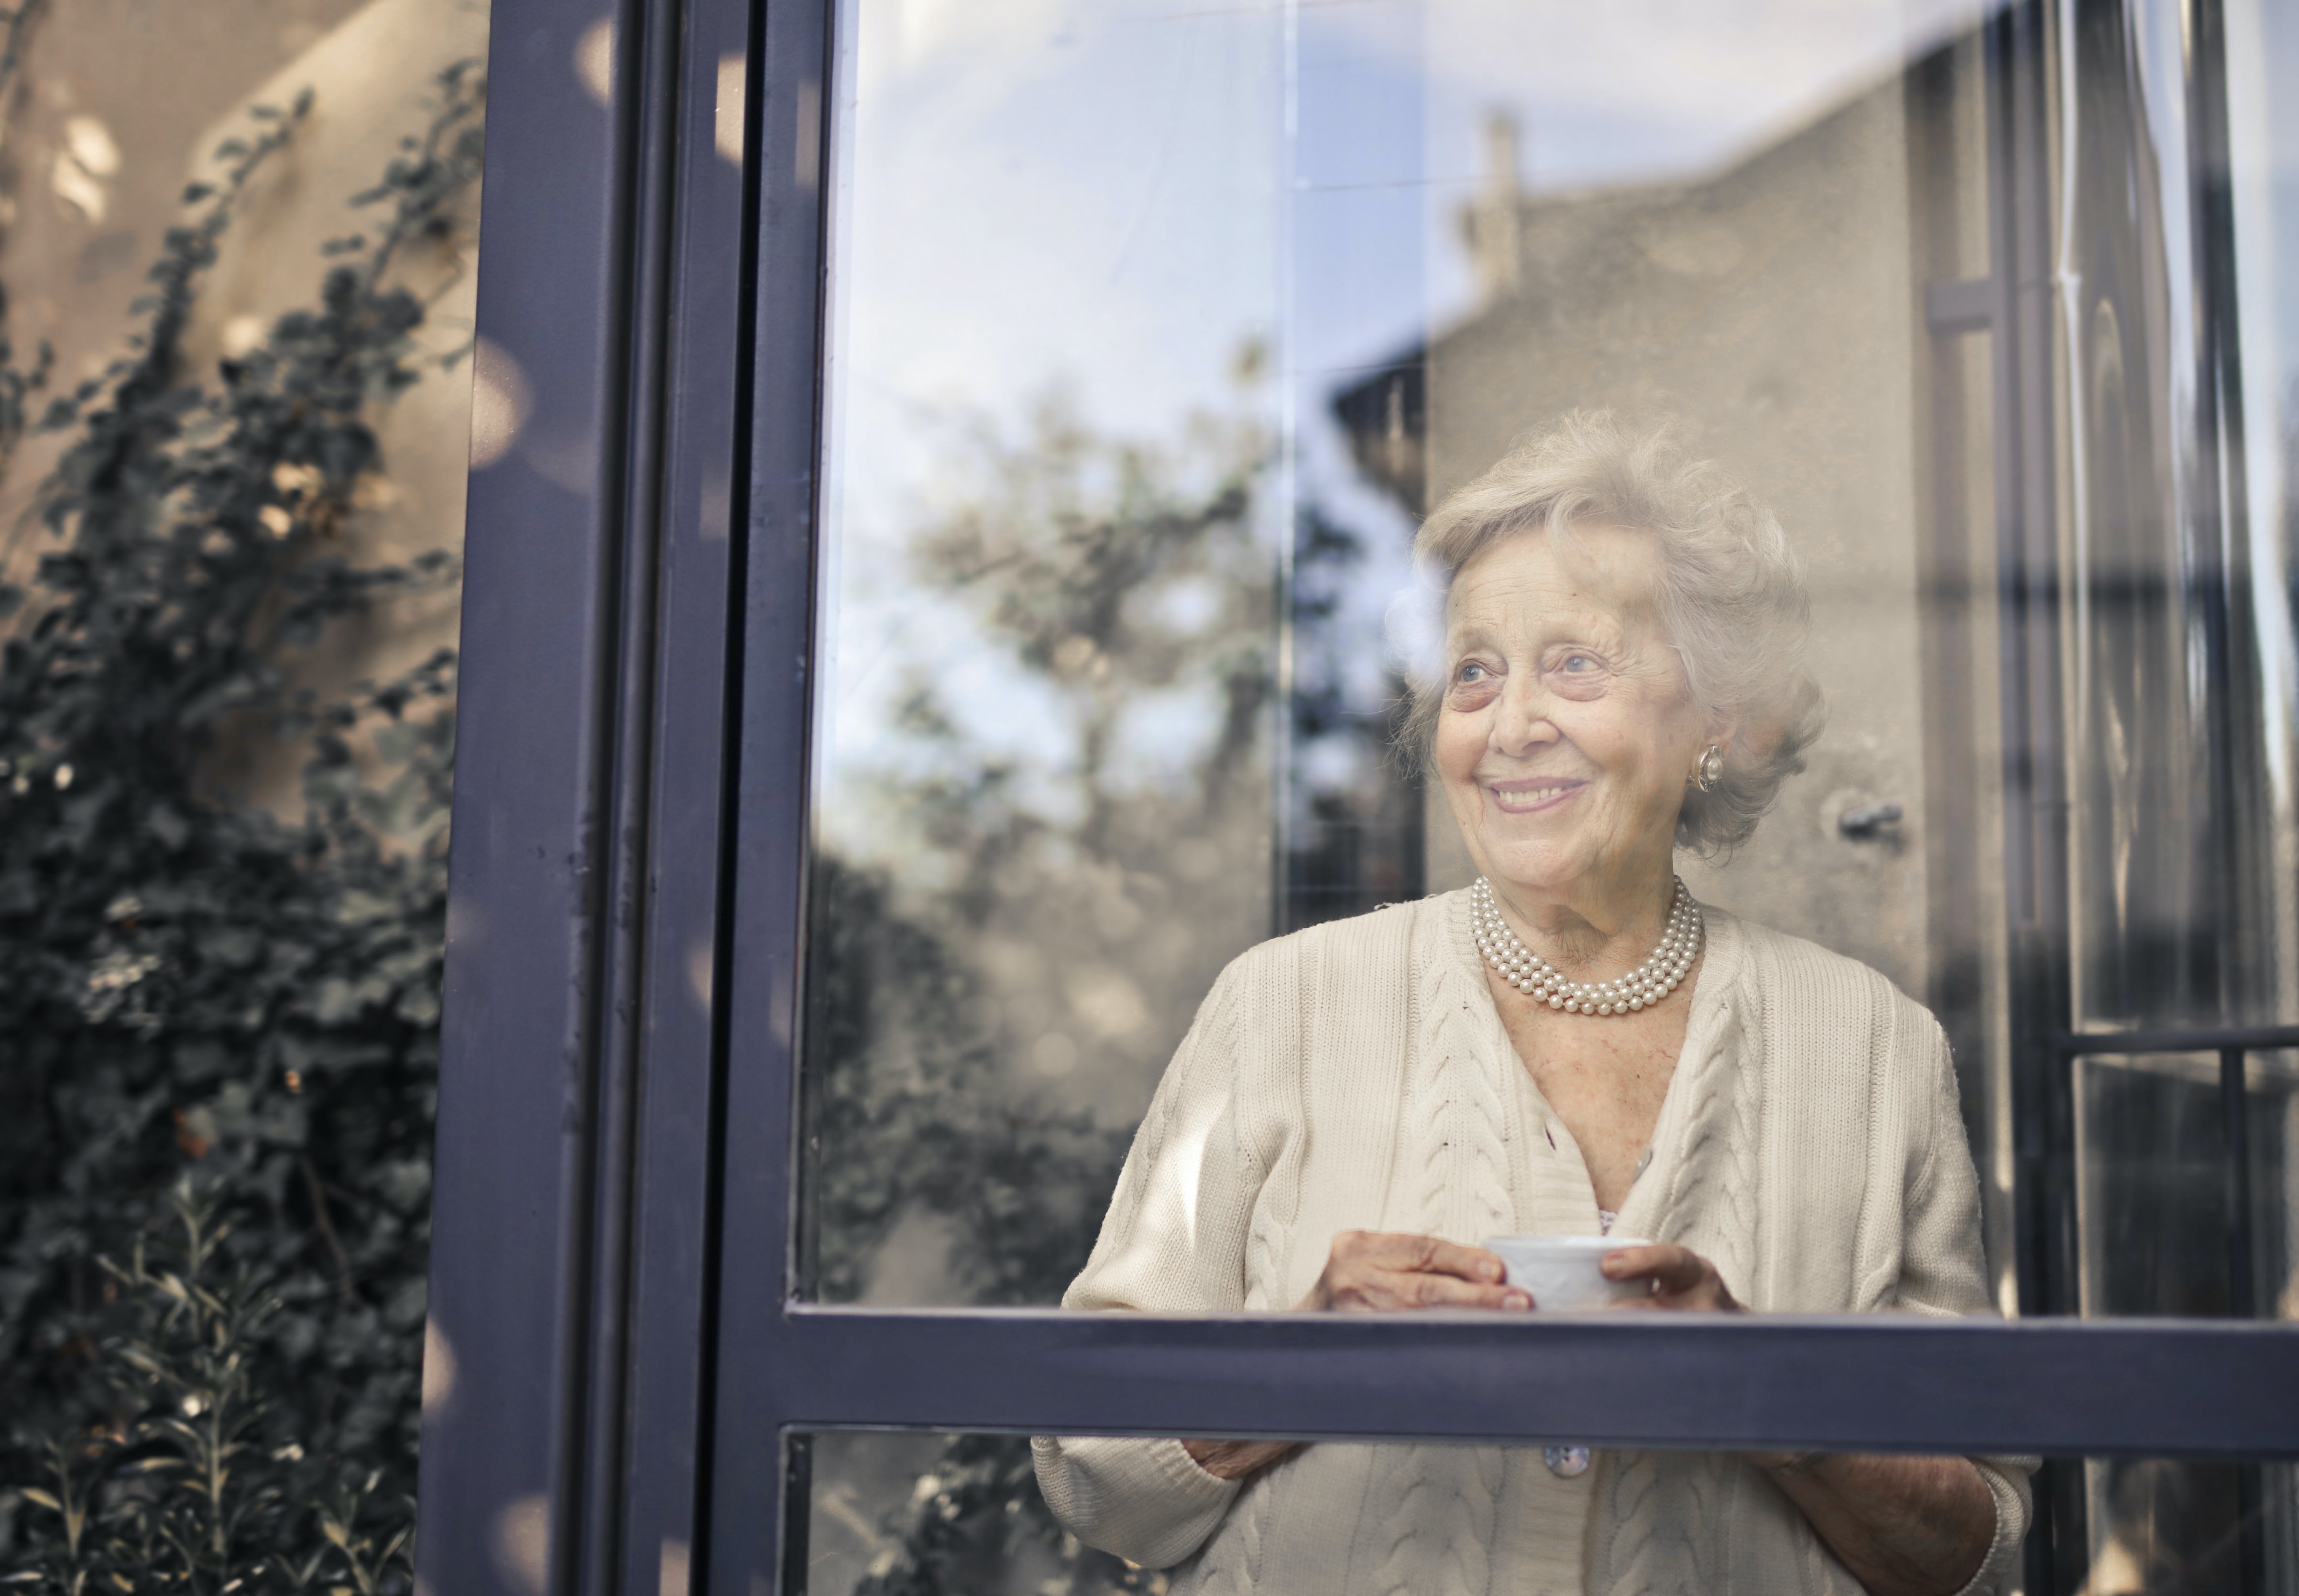 An older woman smiling while holding a beverage and looking out of a window | Source: Pexels